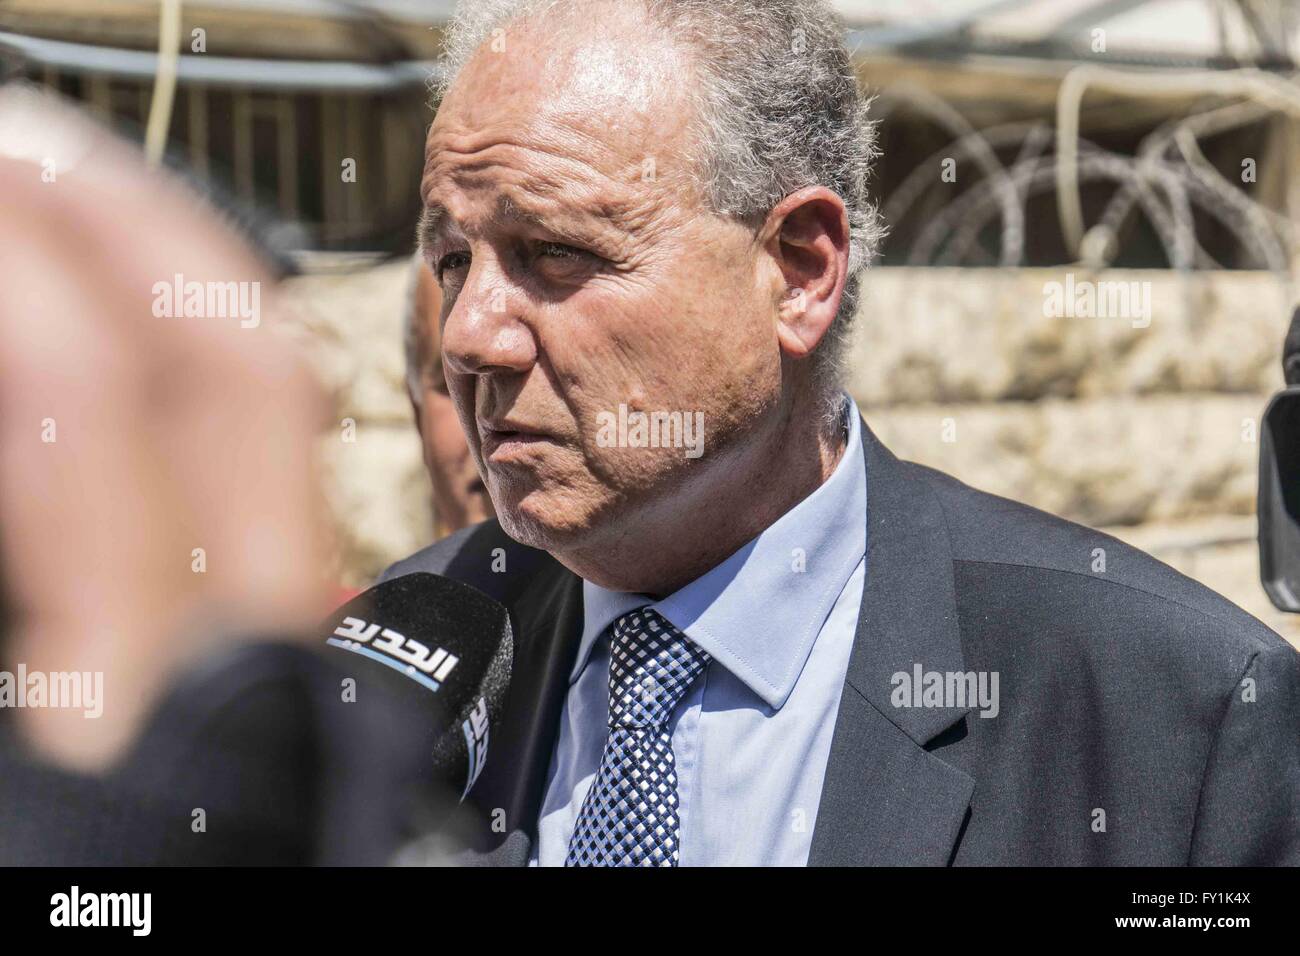 Beirut, Lebanon. 20th Apr, 2016. April 20, 2016 - Baabda Court House, Beirut, Lebanon: Lawyer for Sally Faulkner, Ghassan Moghabghab outside the courthouse where his client Sally Faulkner of Brisbane, Australia, and members of the Australian TV show '60 Minutes', a Nine Network production, were released after abducting her two children from the custody of her estranged husband, Ali Zeid al-Amin, a surfing instructor who lives south of the Lebanese capital, Beirut. Tara Brown, the presenter famous from 60 Minutes, reporter Stephen Rice, cameraman Ben Williamson and sound recordist David Bal Stock Photo